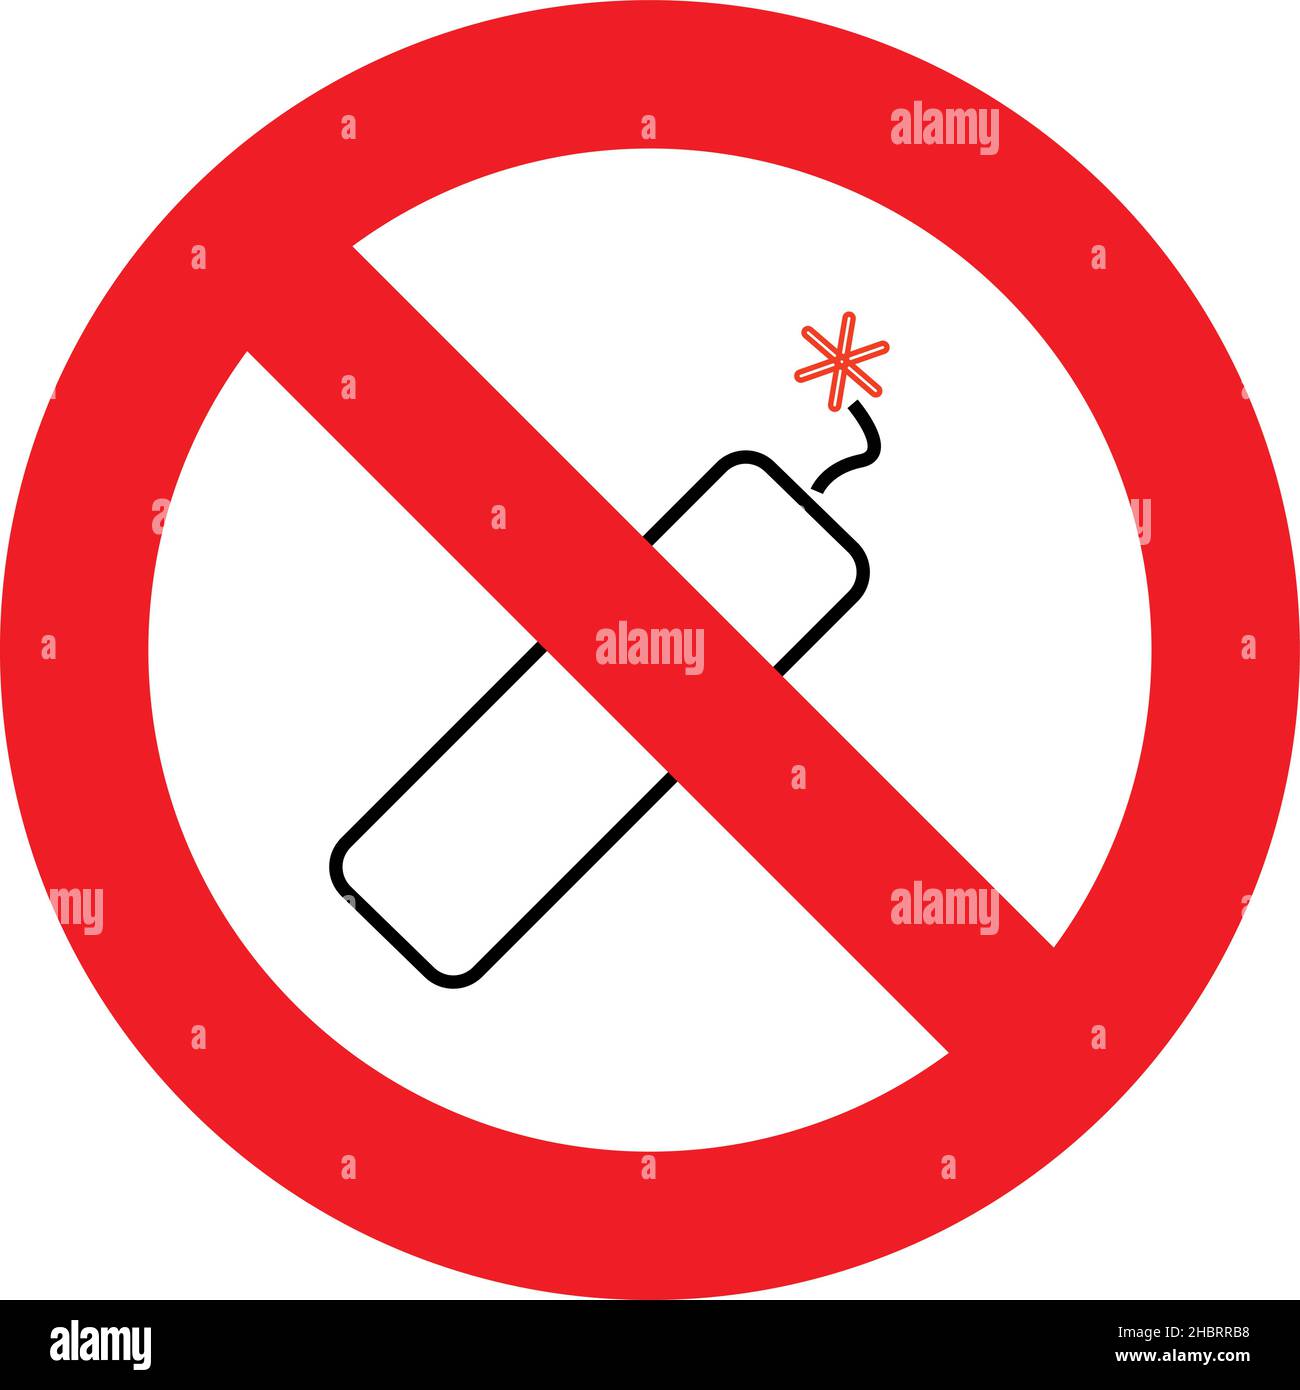 Stop or ban red round sign with firecracker icon vector illustration Stock Vector